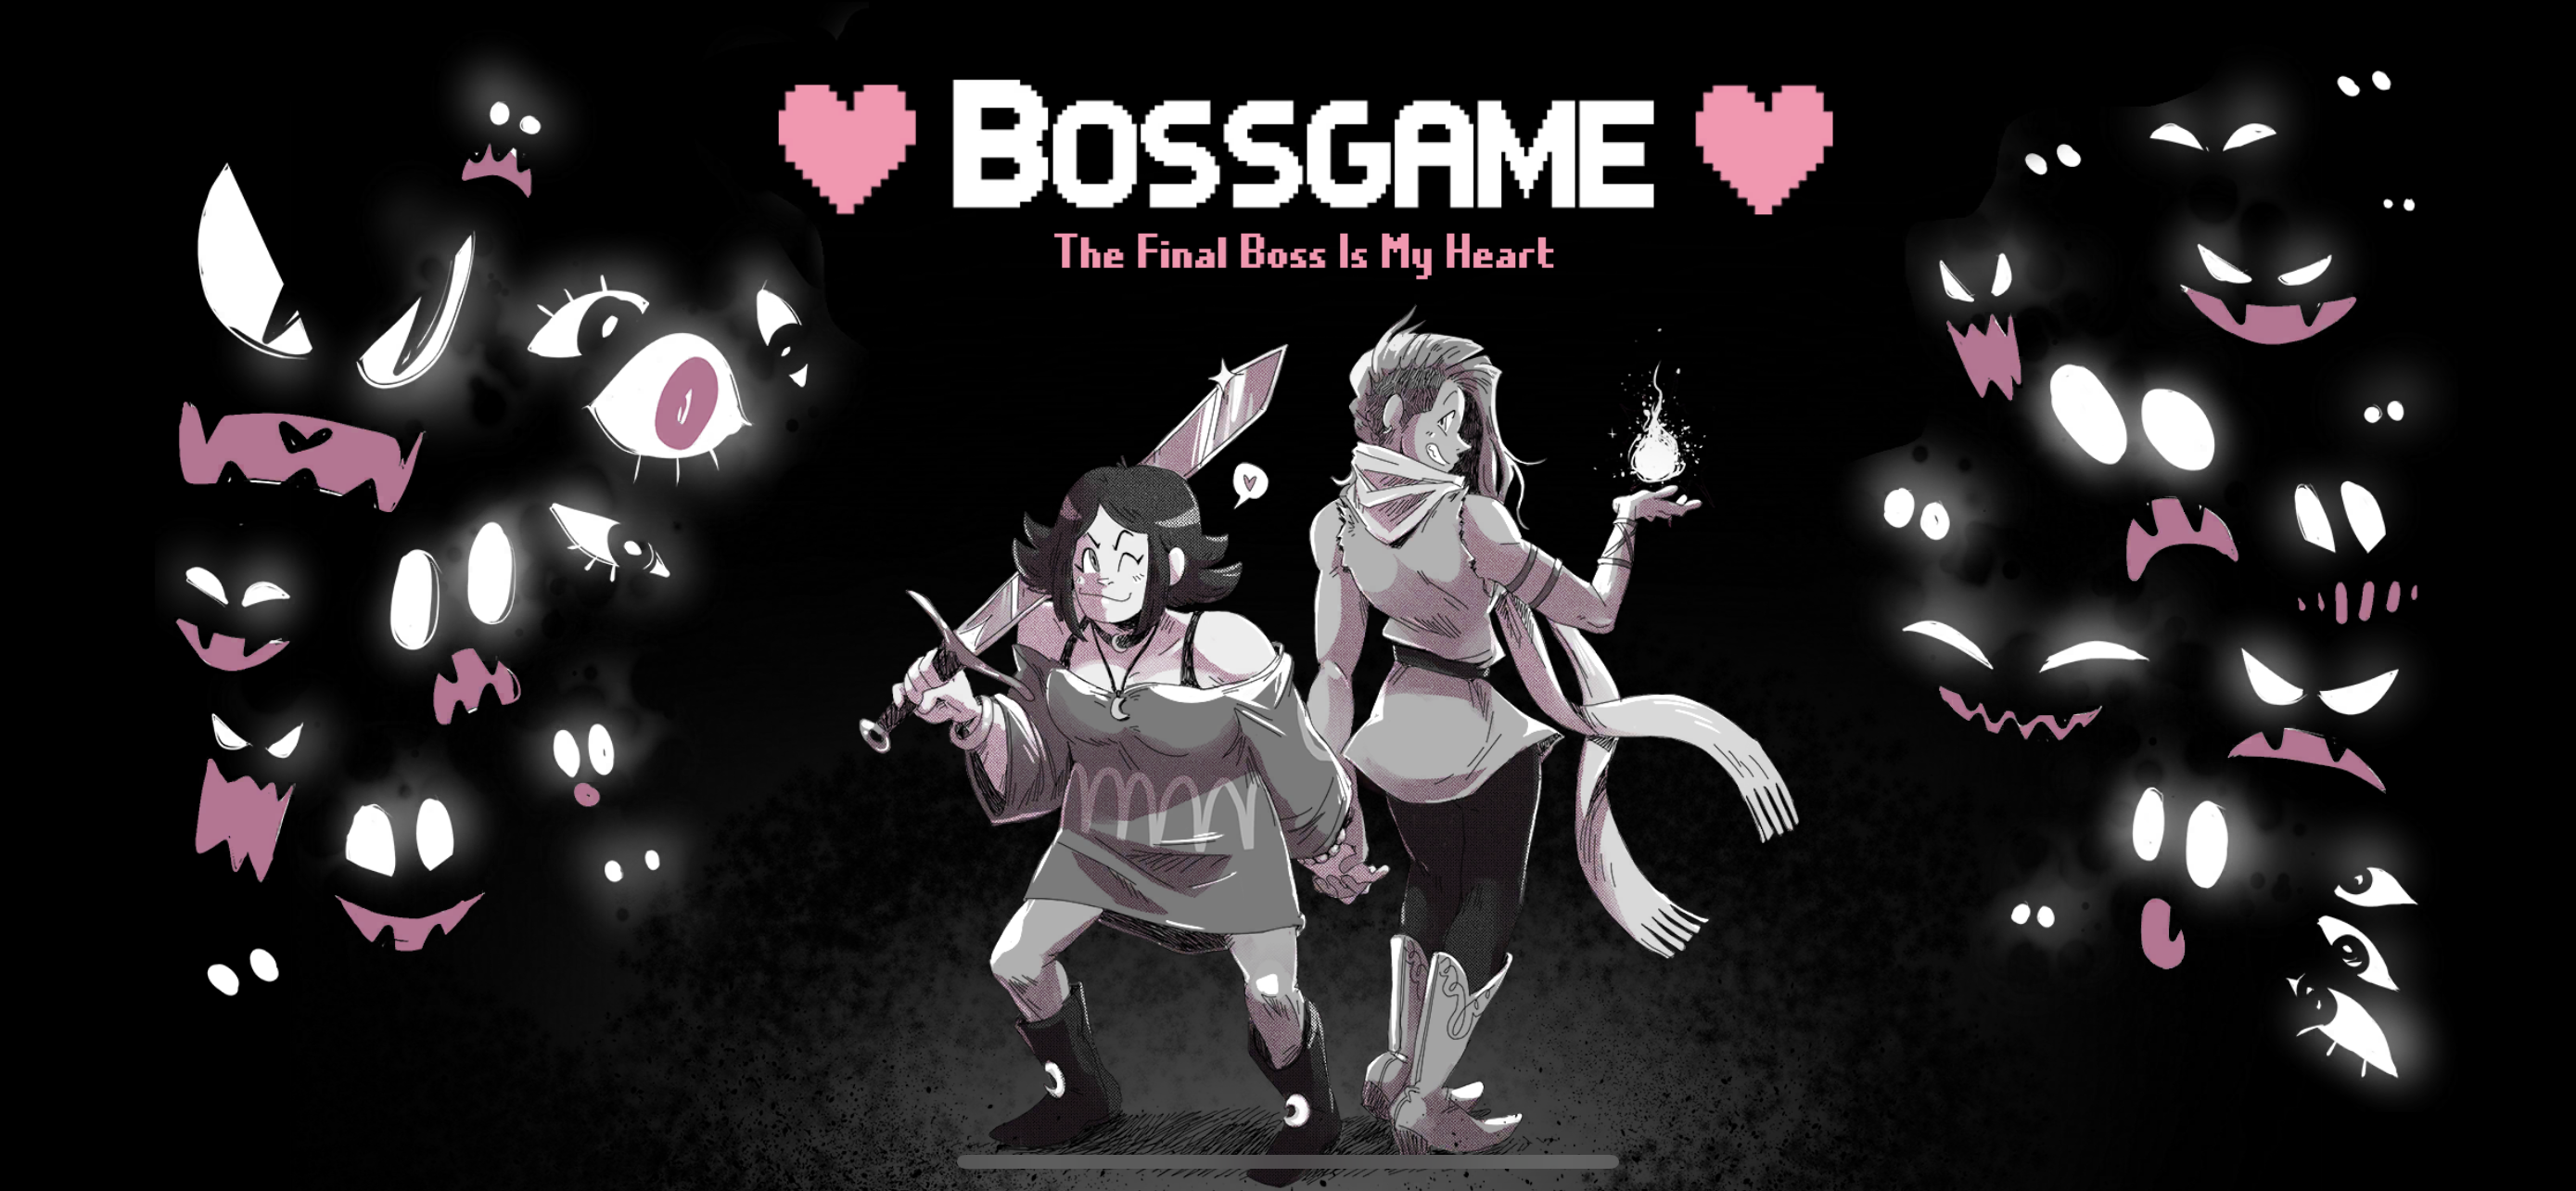 BOSSGAME: The Final Boss Is My Heart absolutely rules